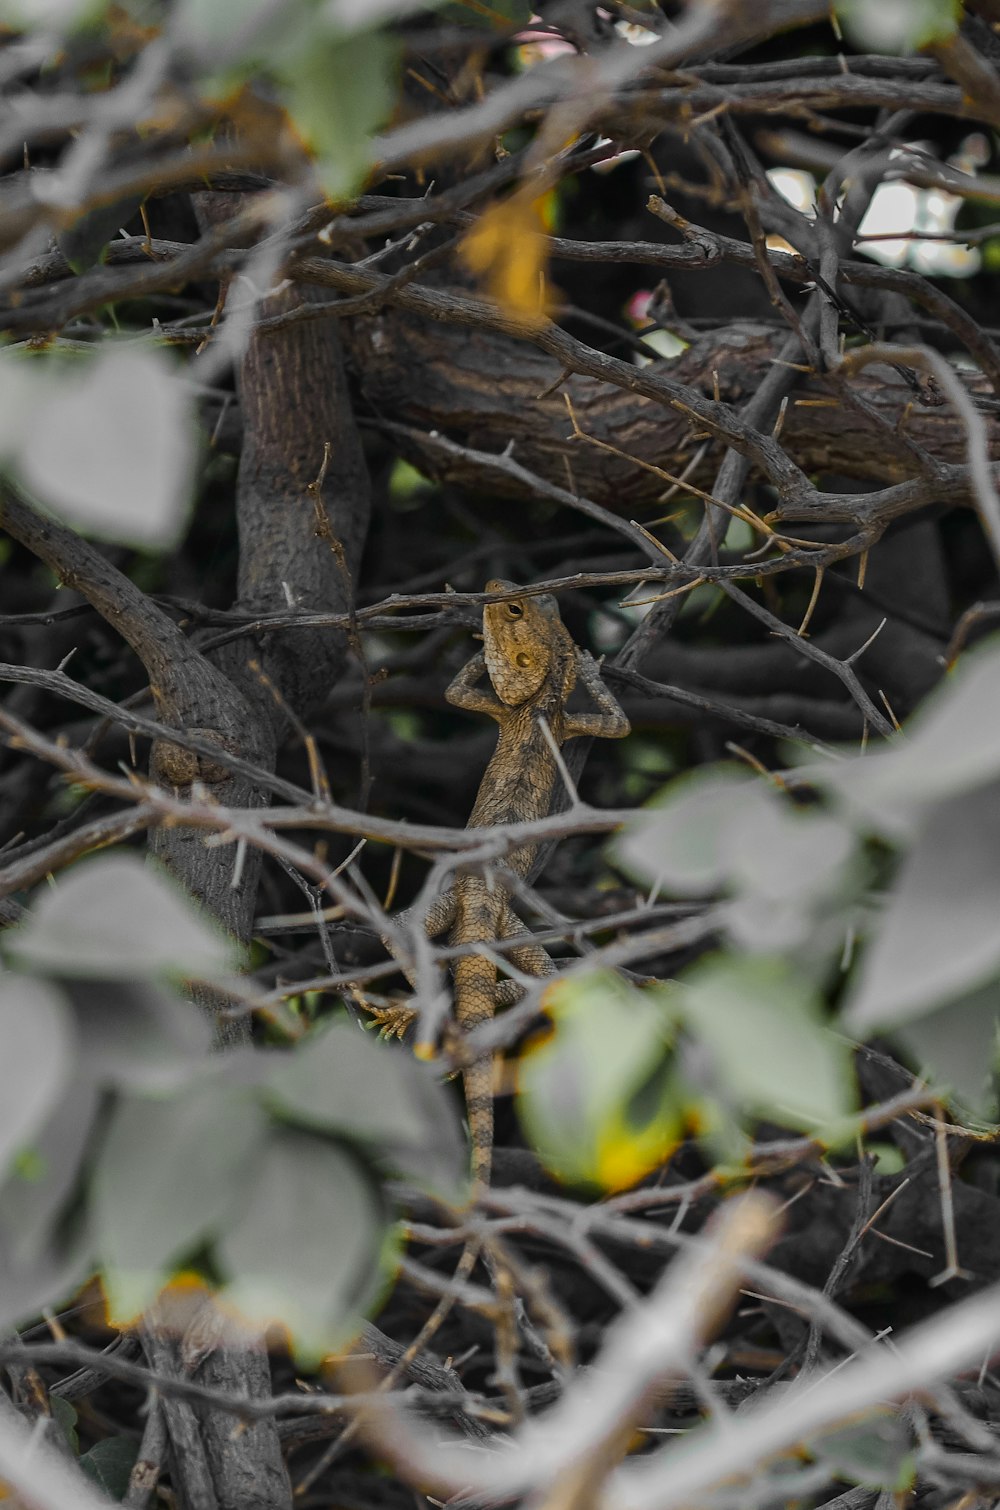 a small lizard sitting on a tree branch